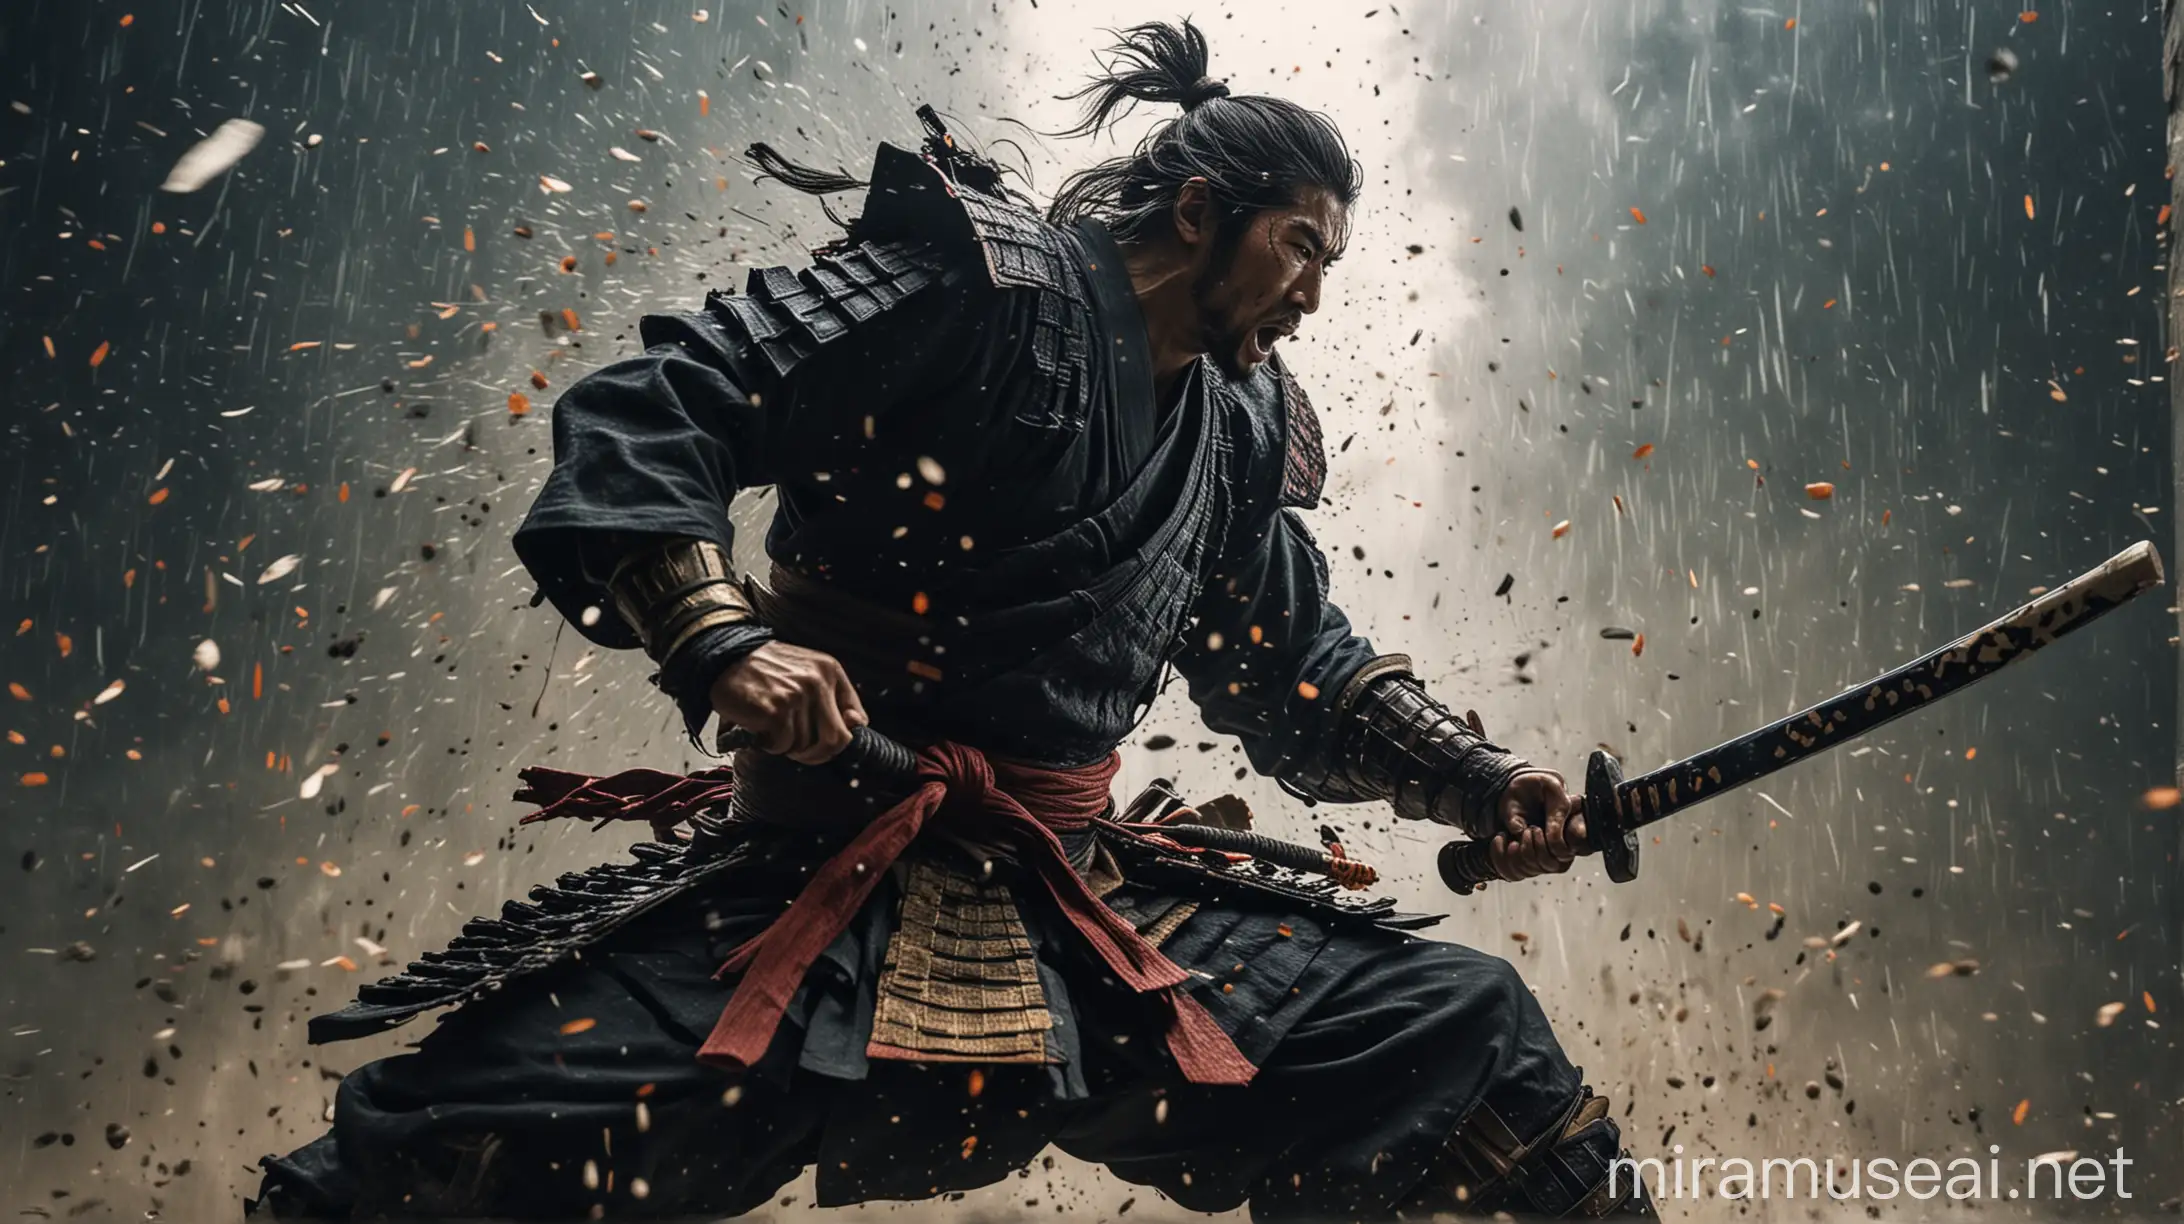 A samurai swings a powerful thunderous slash against his enemies with a close-up view from below